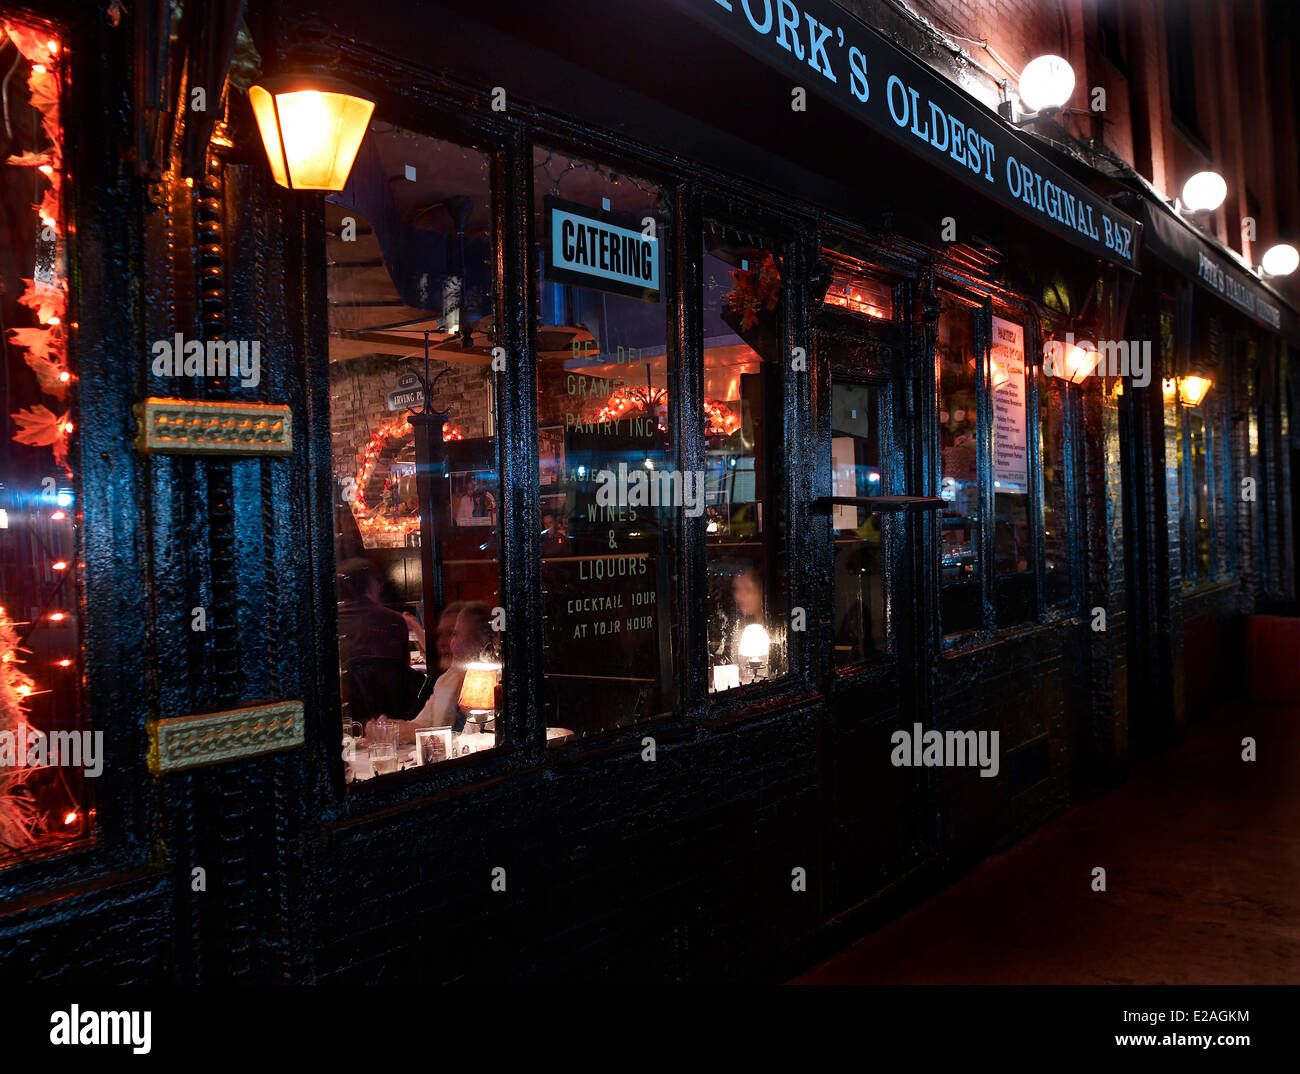 United States, New York, feature : New York Confidential, bar Pete 's Tavern Stock Photo